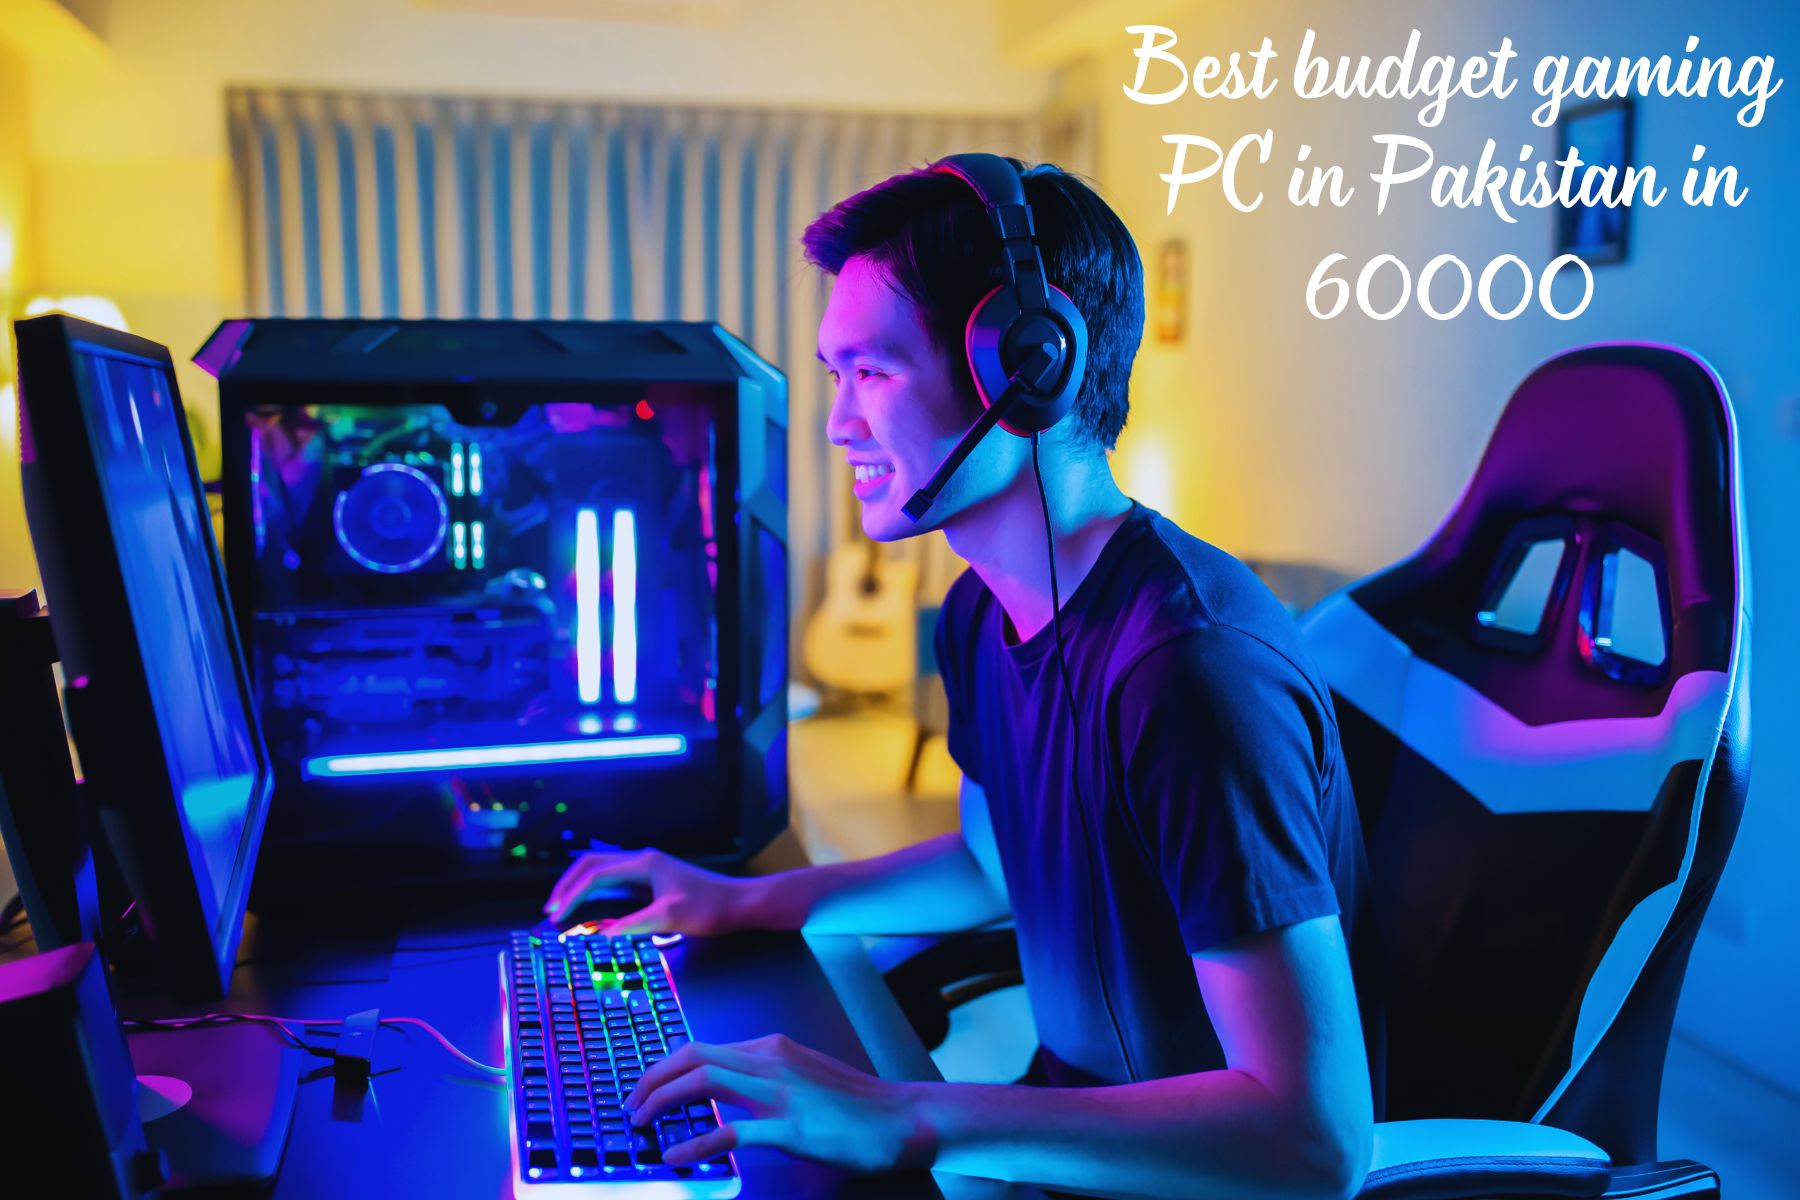 Best budget gaming PC in Pakistan